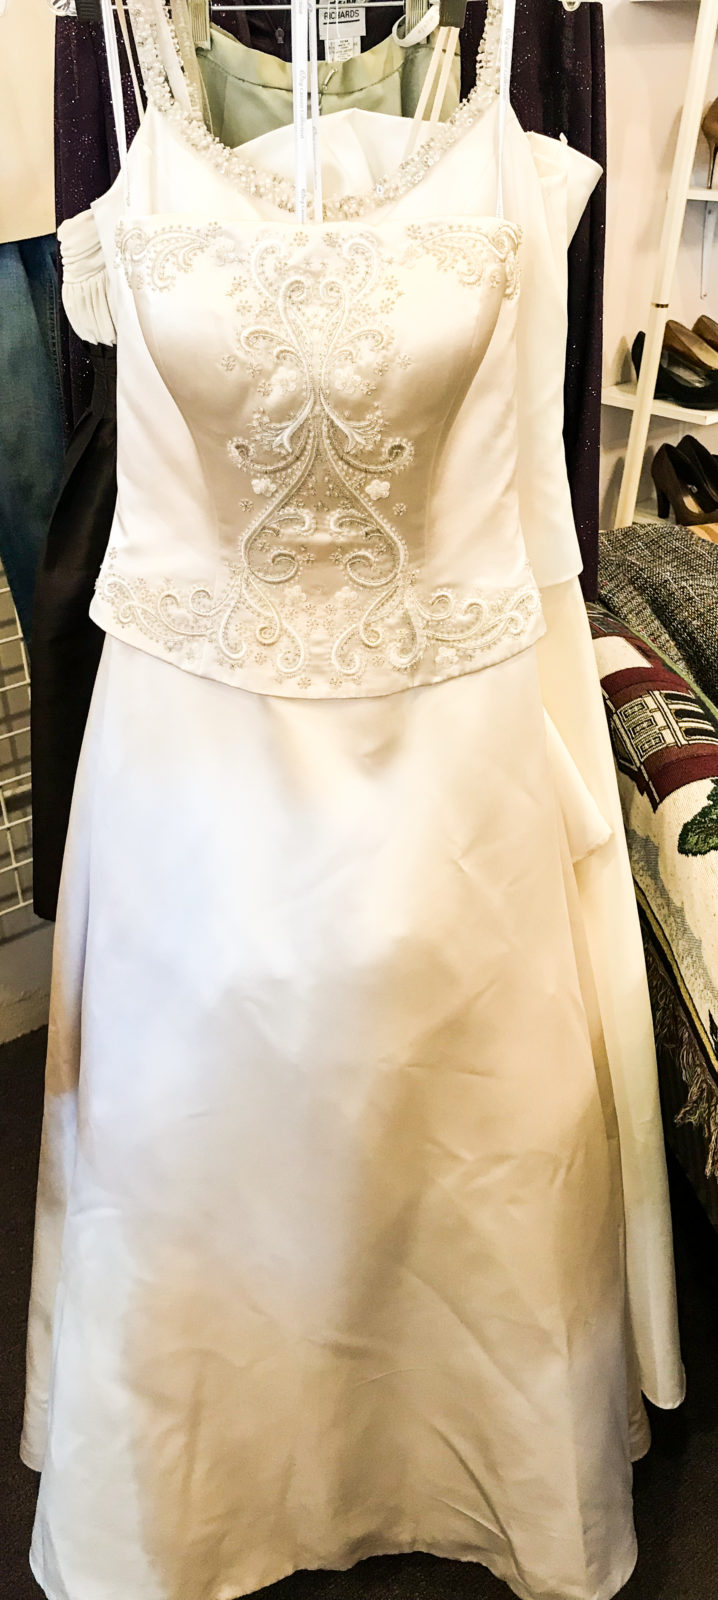 Oleg Cassini Wedding Gown • Beautiful white satin with embroidered top wedding gown. Size 6.